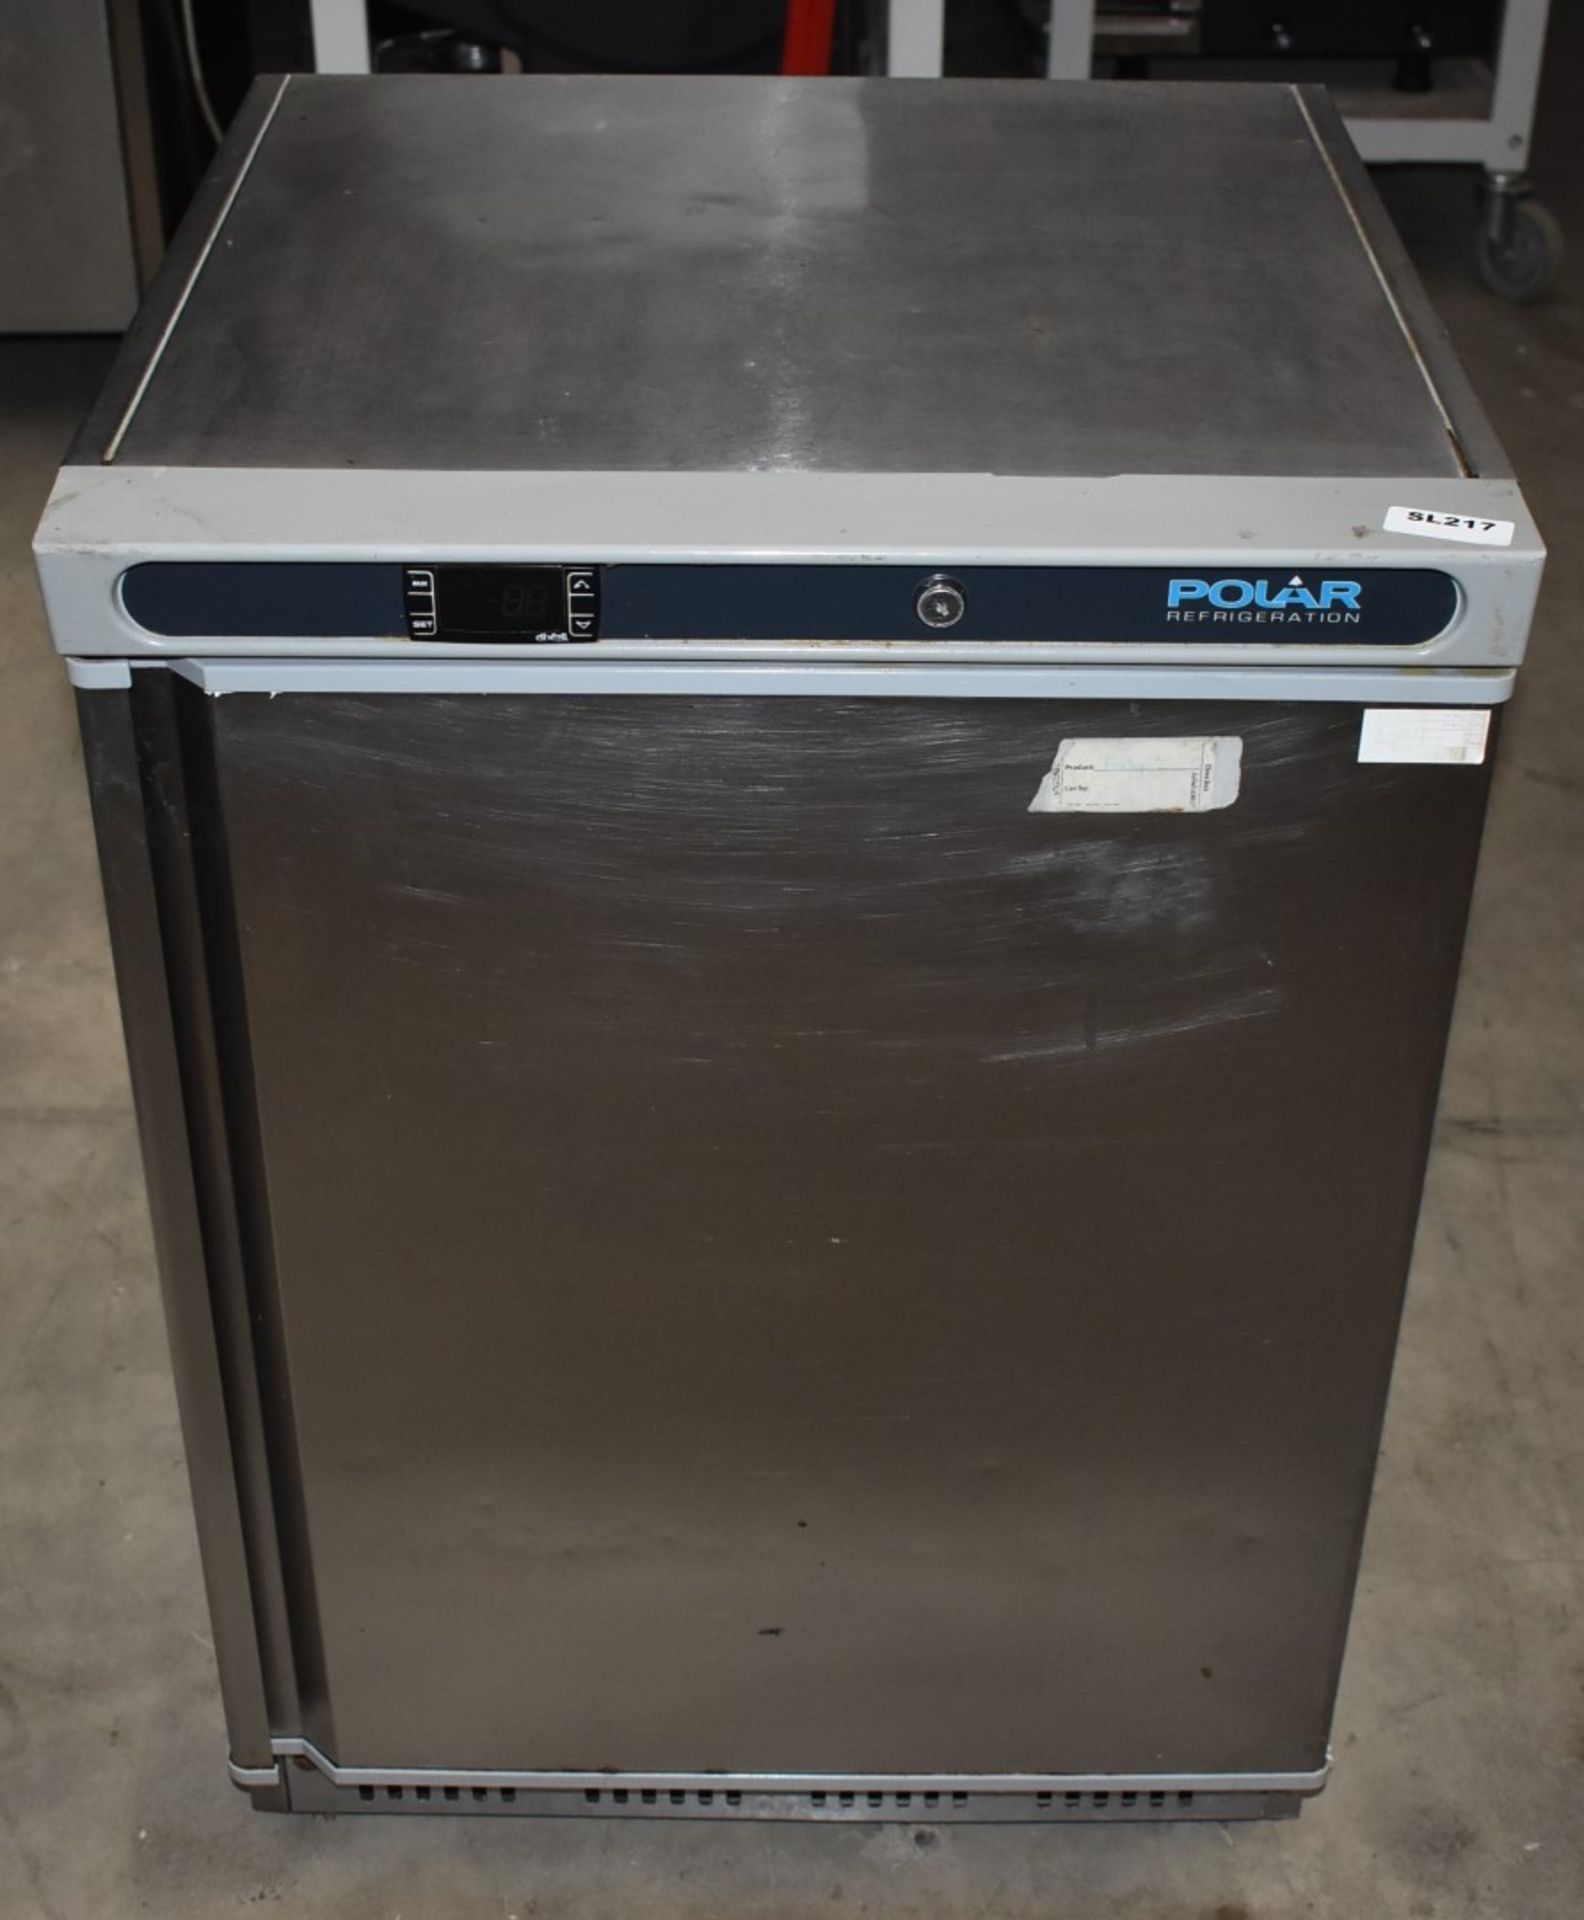 1 x Polar CD080 Undercounter Stainless Steel Fridge - Recently Removed From a Restaurant Environment - Image 3 of 7